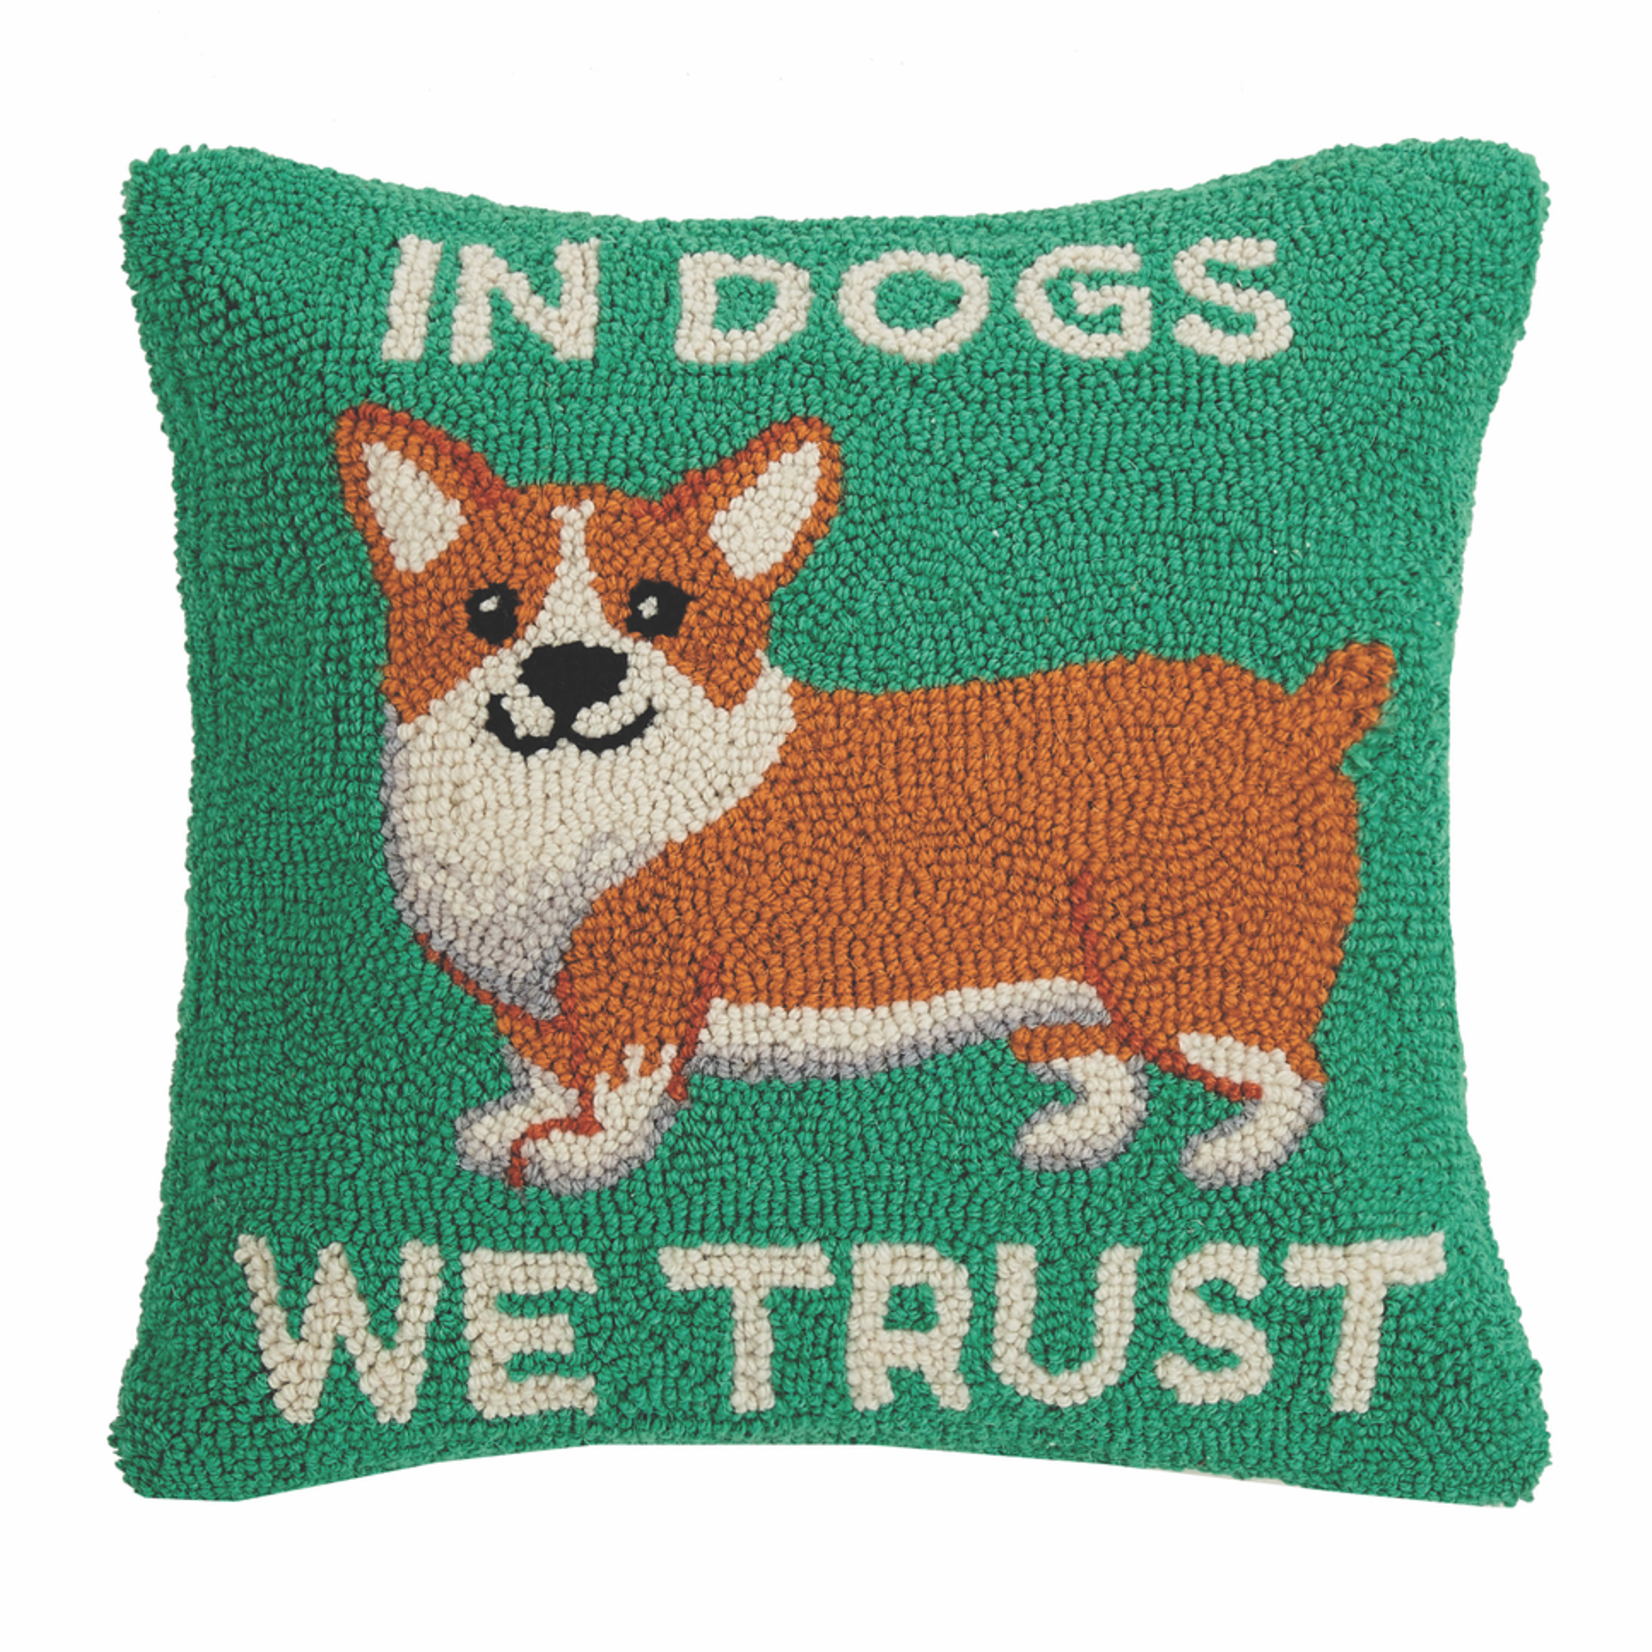 Pillows - Hooked In Dogs We Trust Pillow